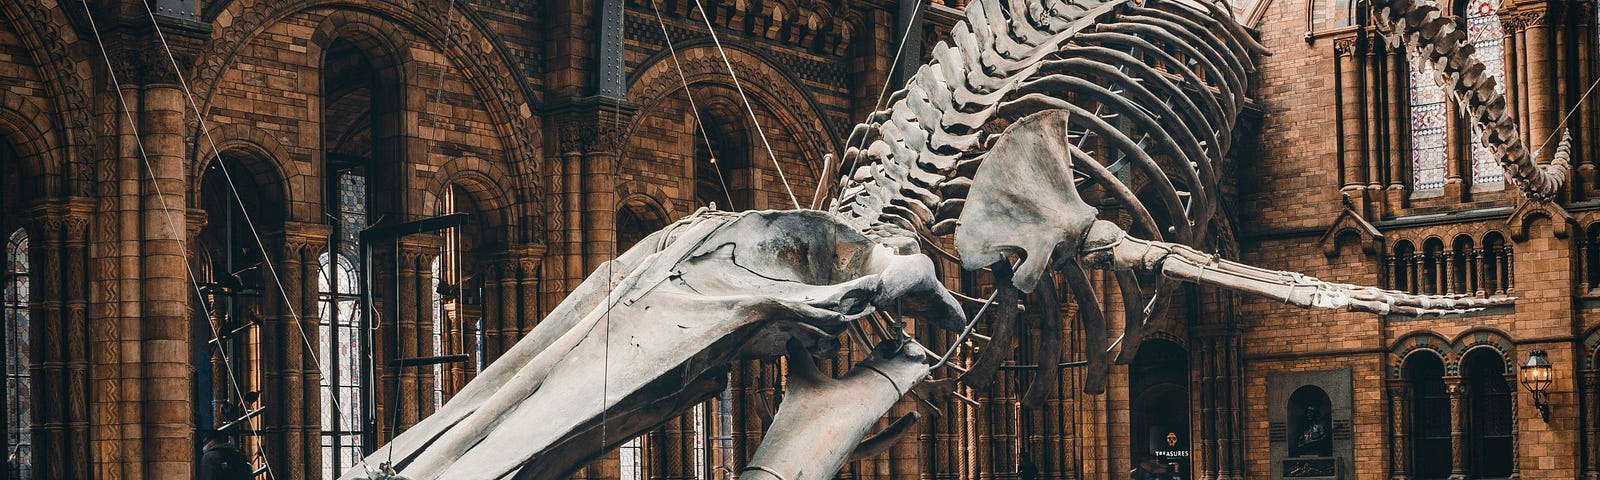 a whale skeleton in a museum